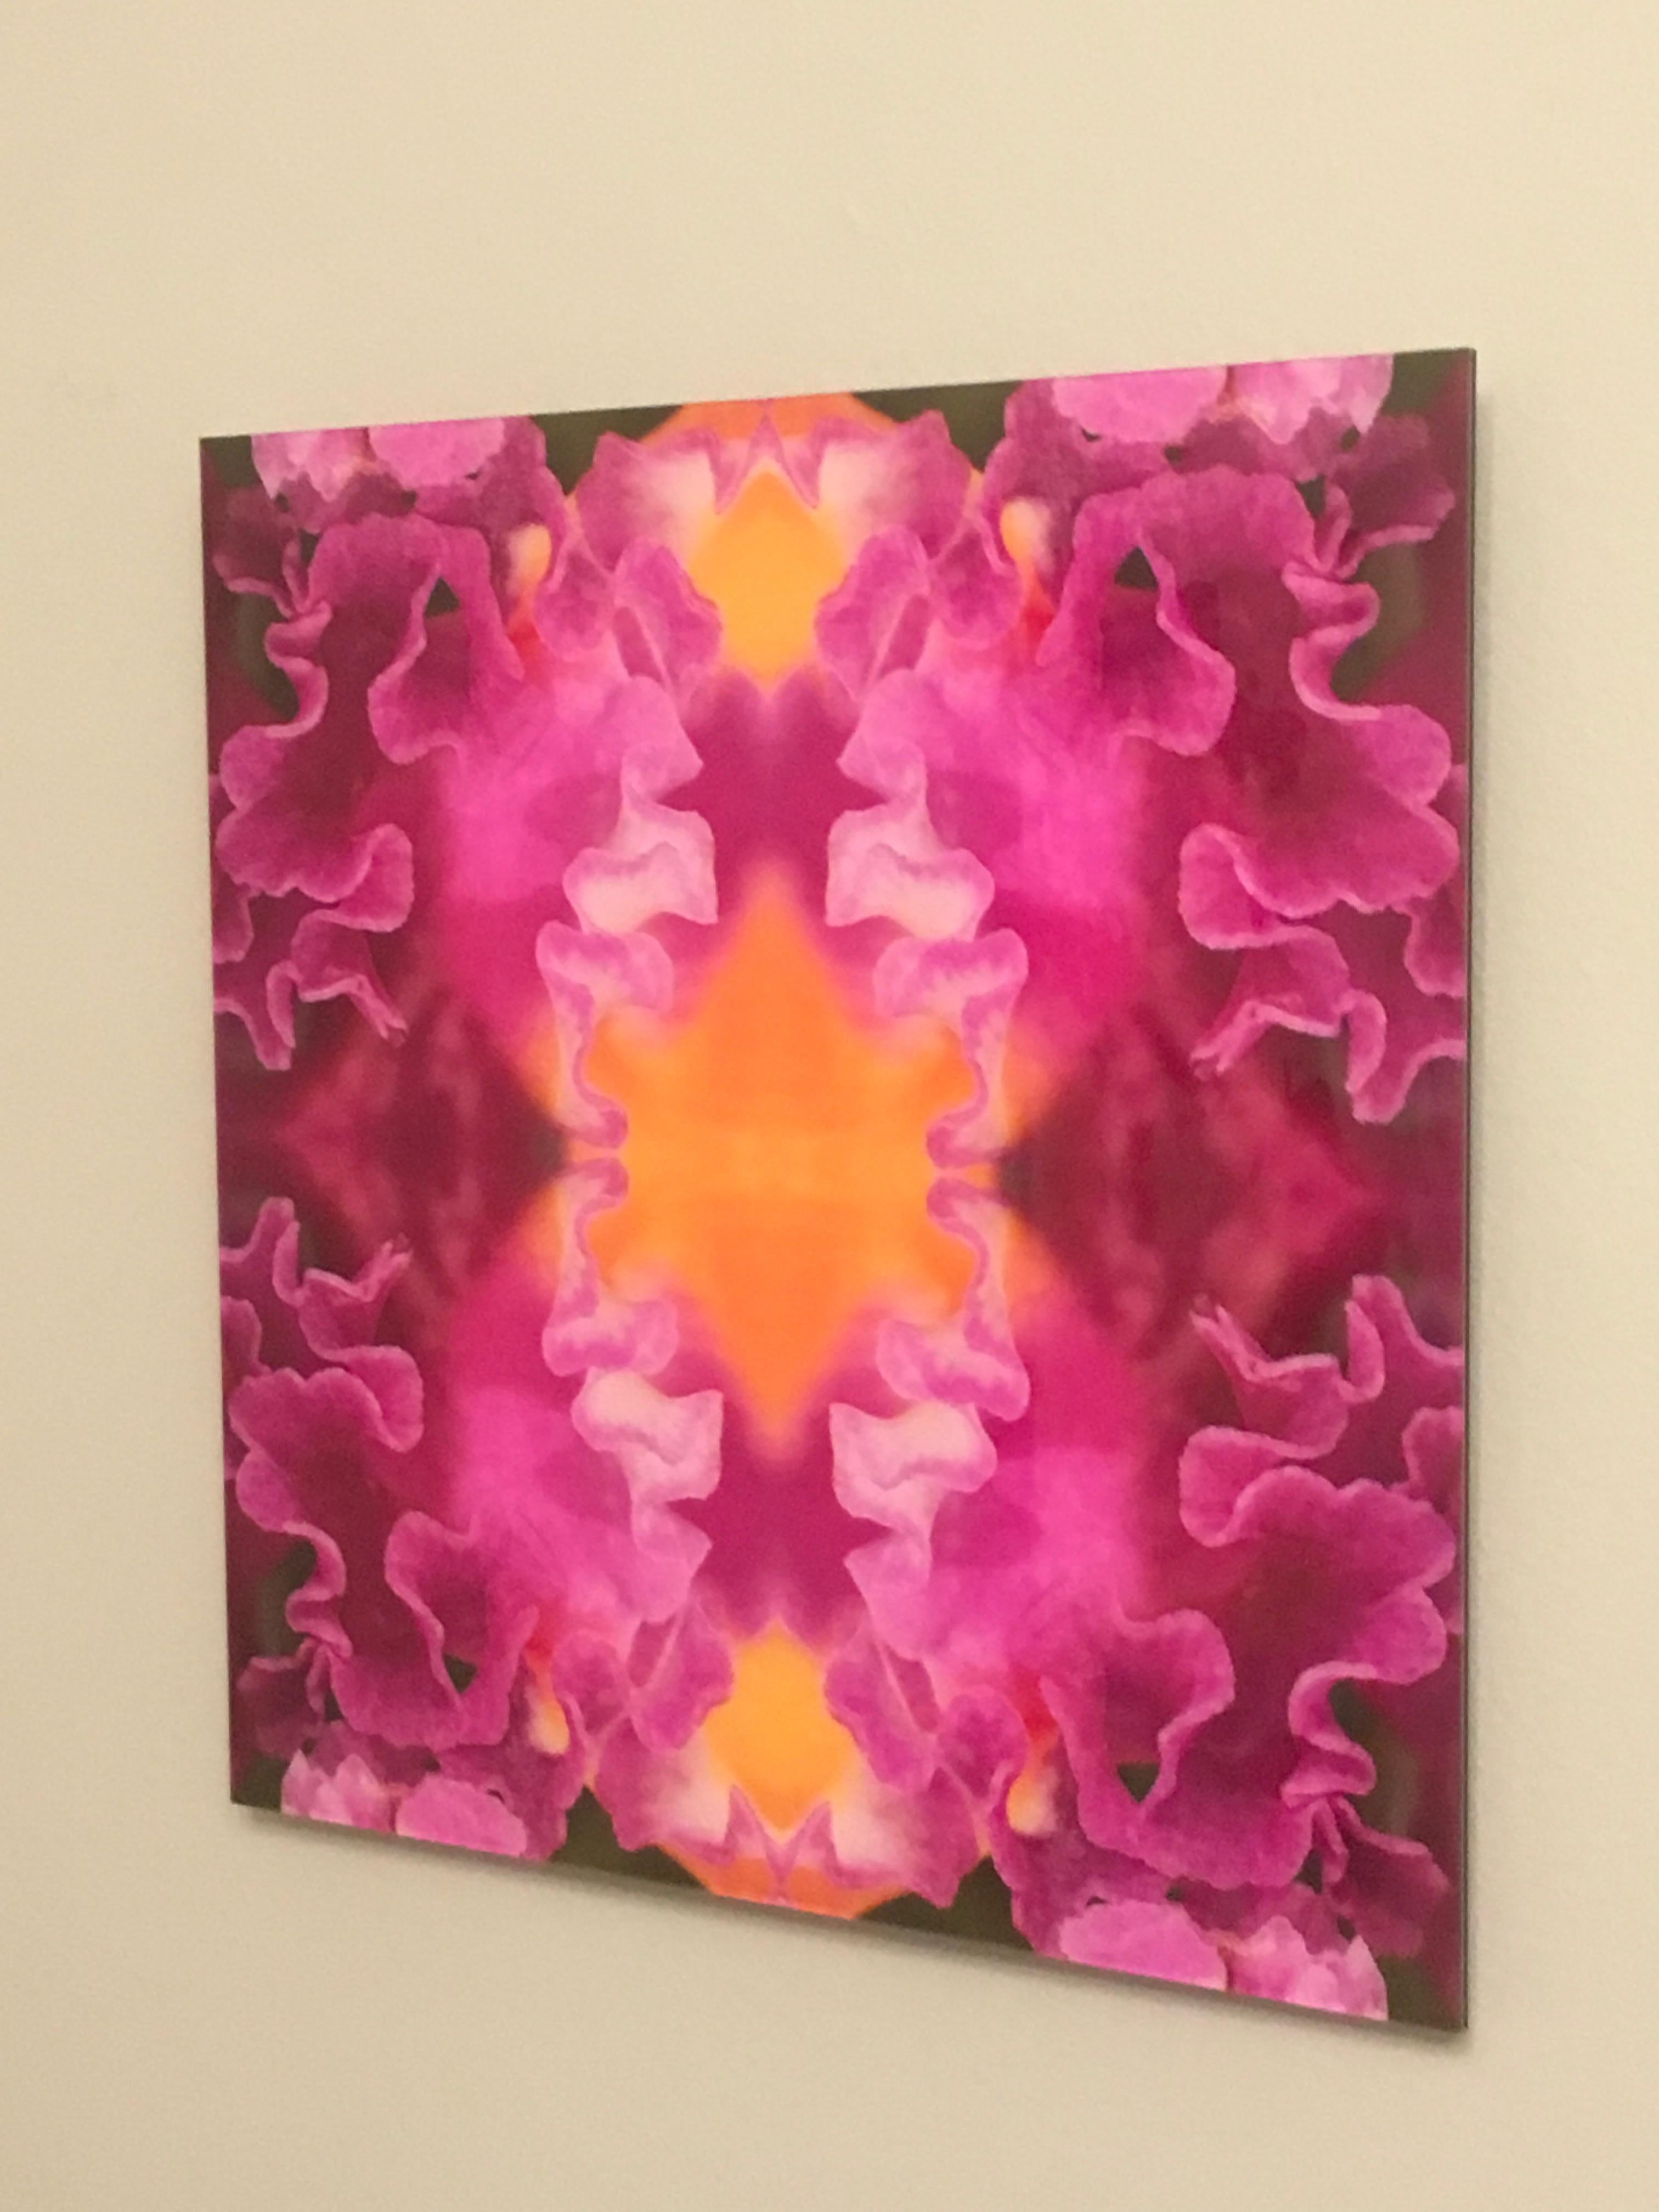 Rebecca Swanson, Laced III, Limited Edition Photograph, 15x15, plexifacemount frame.  This stunning image is filled fushia and a vibrant yellow/orange color.  This is an edition of 15.  Also available in 30x30.

Rebecca Swanson’s work is inspired